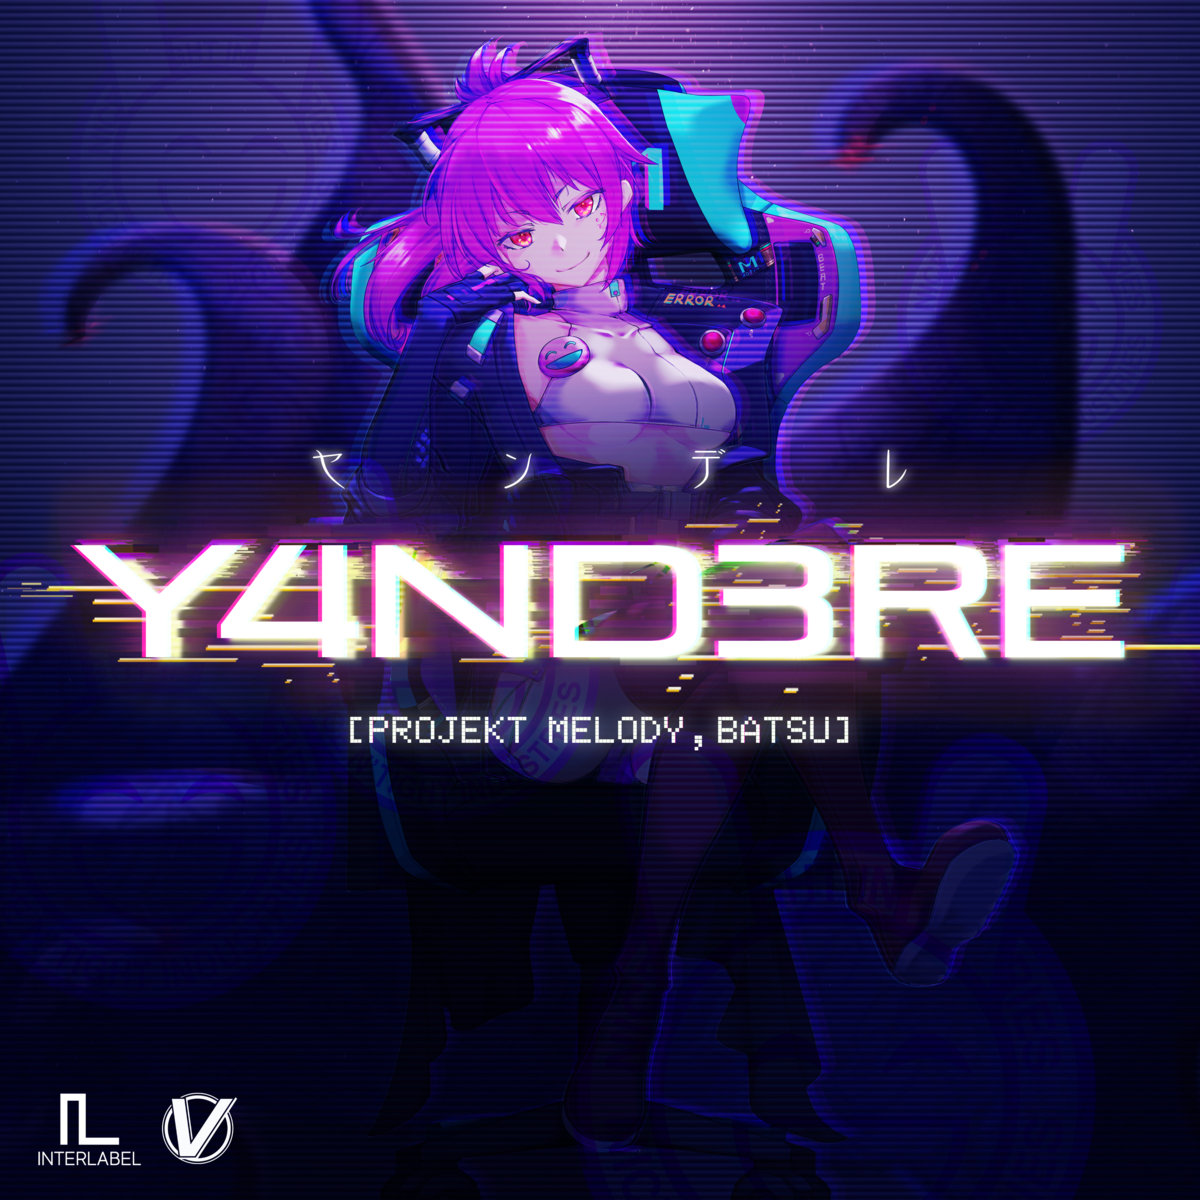 A woman with purple hair sitting in a chair in front of multiple tentacles. Text on cover reads "Y4ND3RE [PROJEKT MELODY, BATSU]"